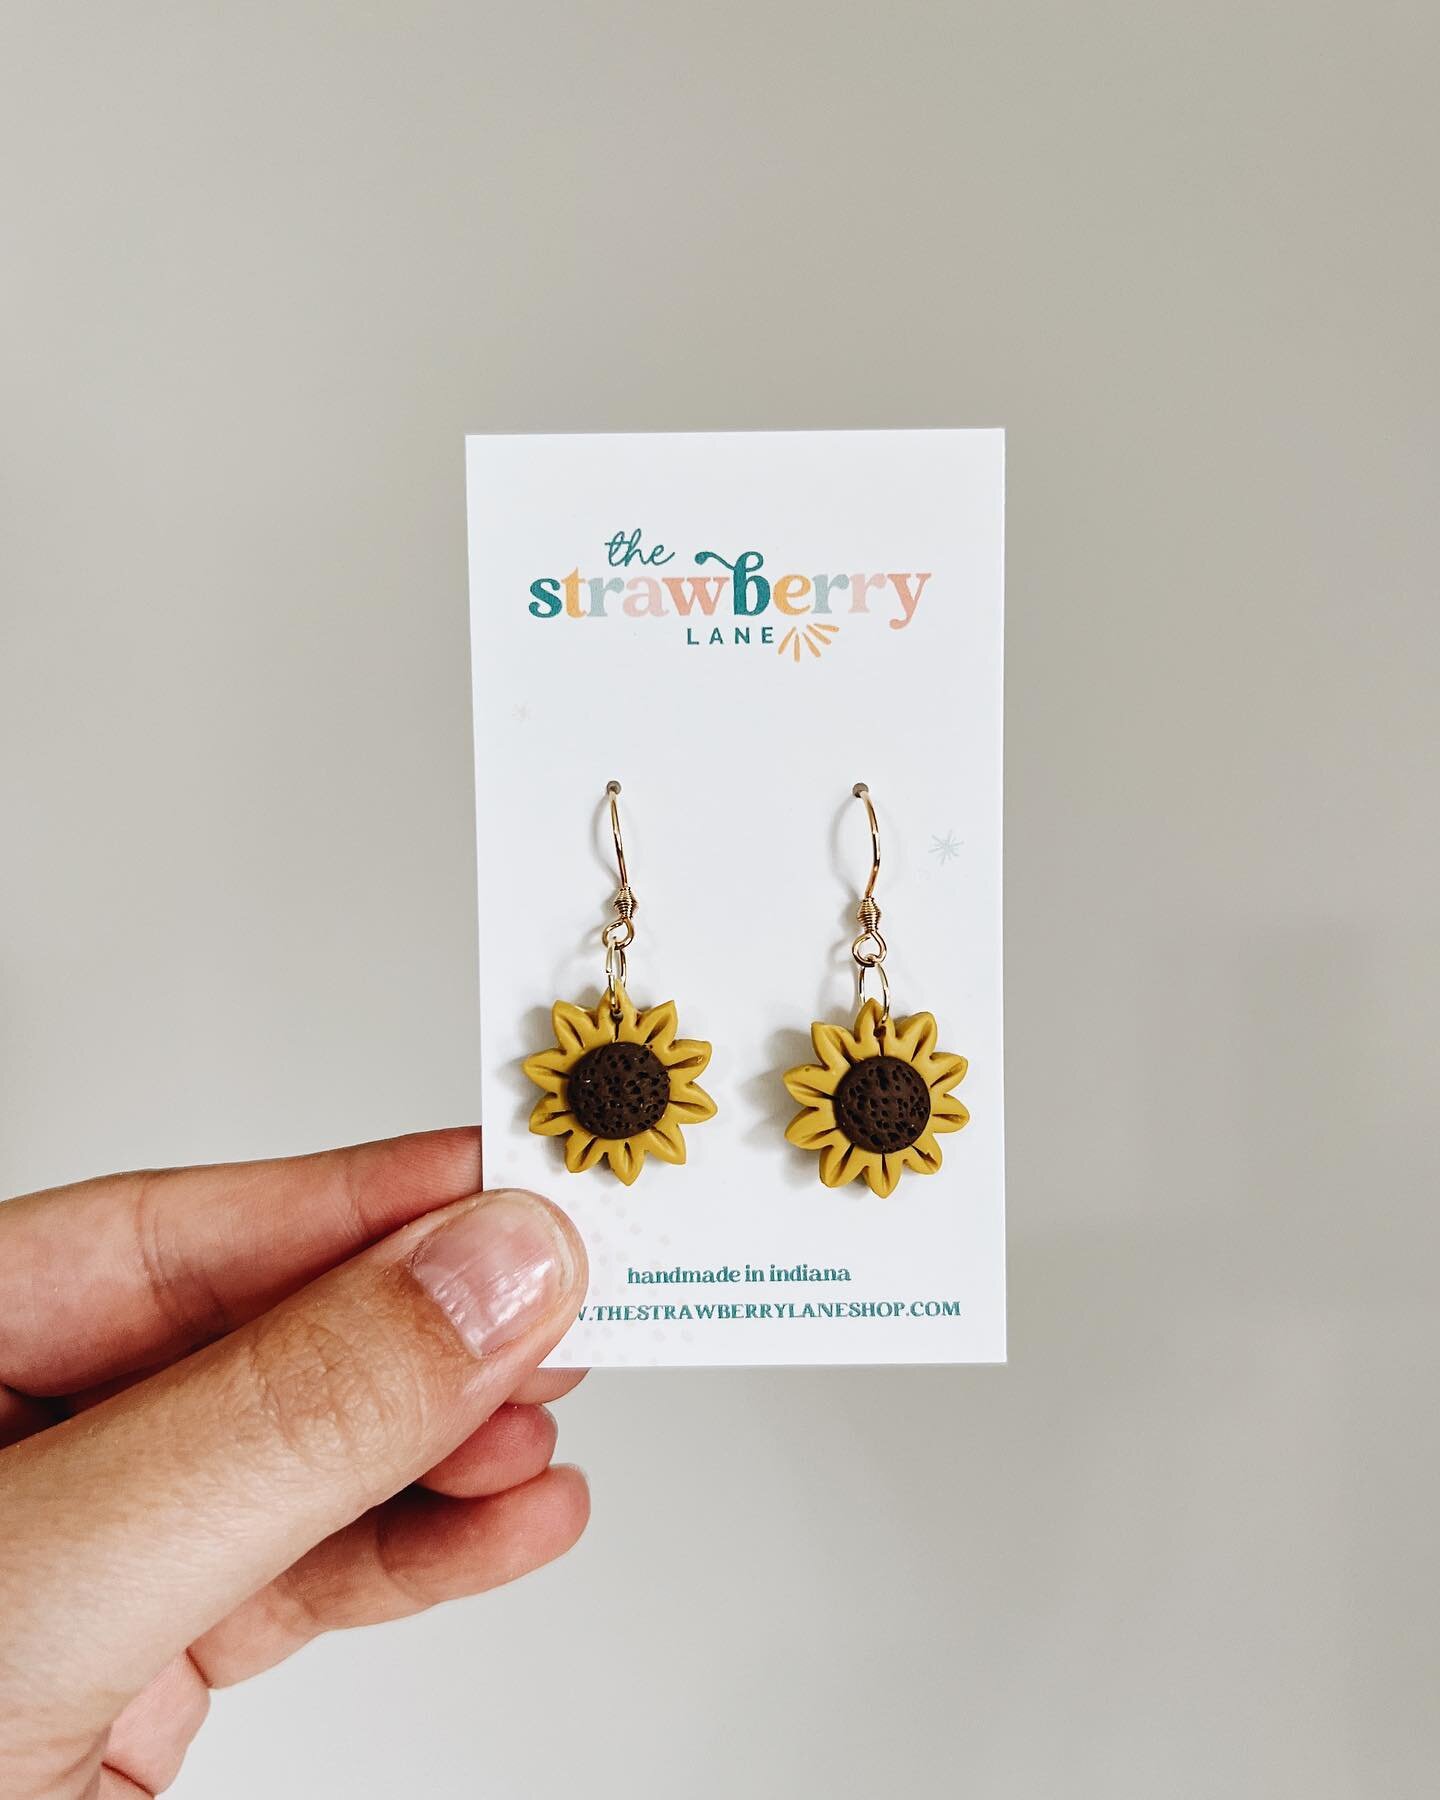 🌻 These cute little sunflowers will be exclusively at my pop up on Saturday! I made one batch of these so this style is while supplies last.